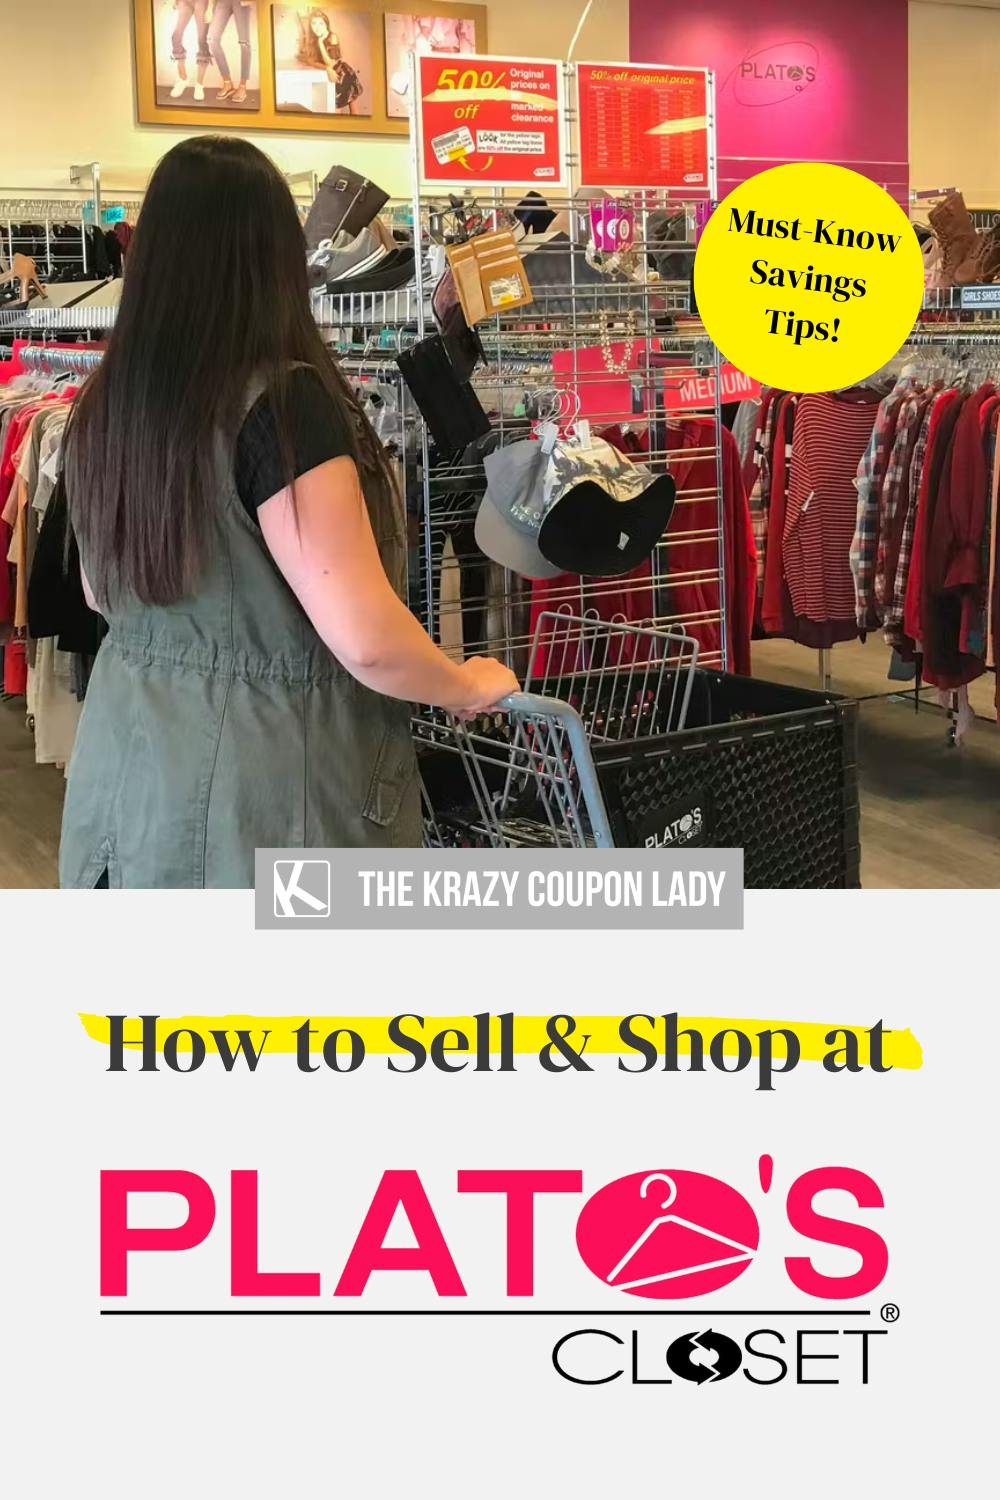 How Much Does Plato's Closet Pay for Clothes? and Other Hot Savings Tips